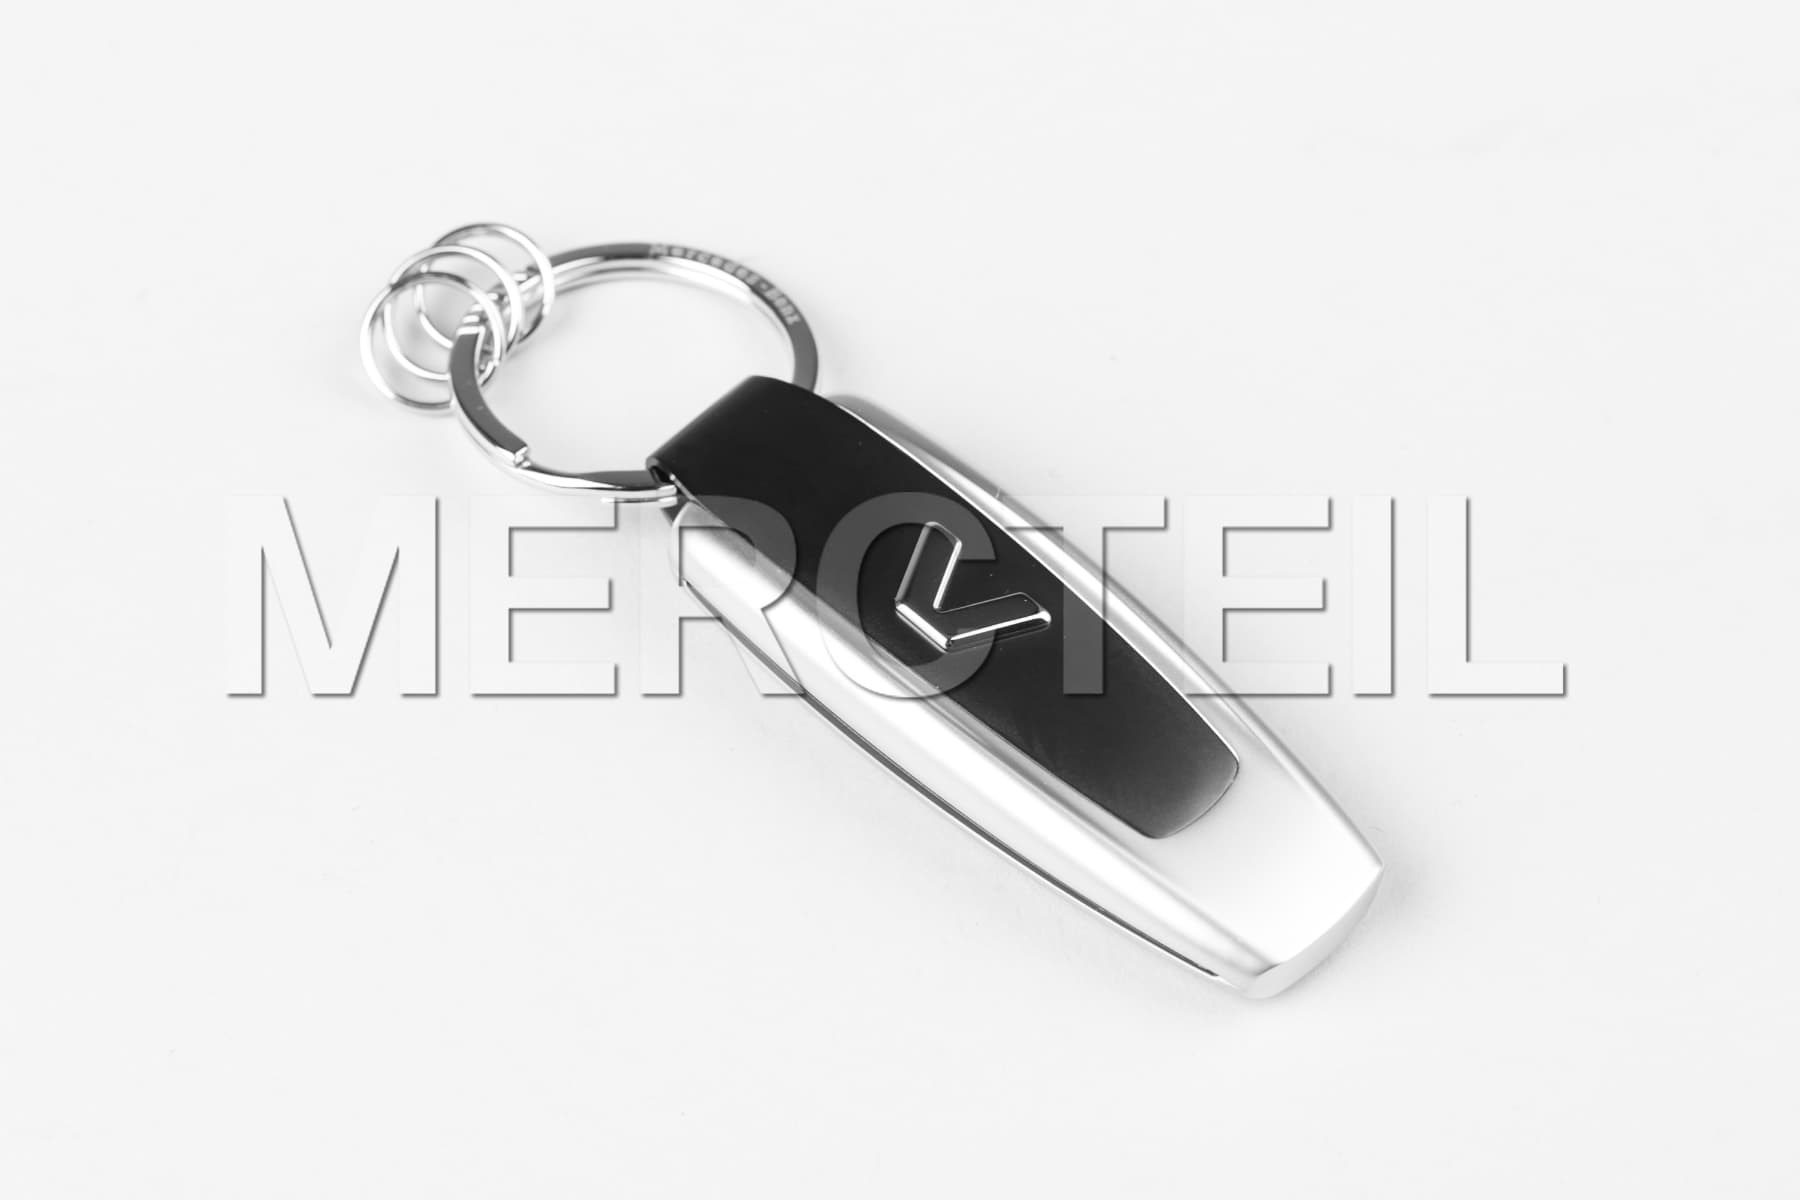 V-Class Model Series Black Silver Keychain Key Ring Genuine Mercedes-Benz (Part number: B66958420)